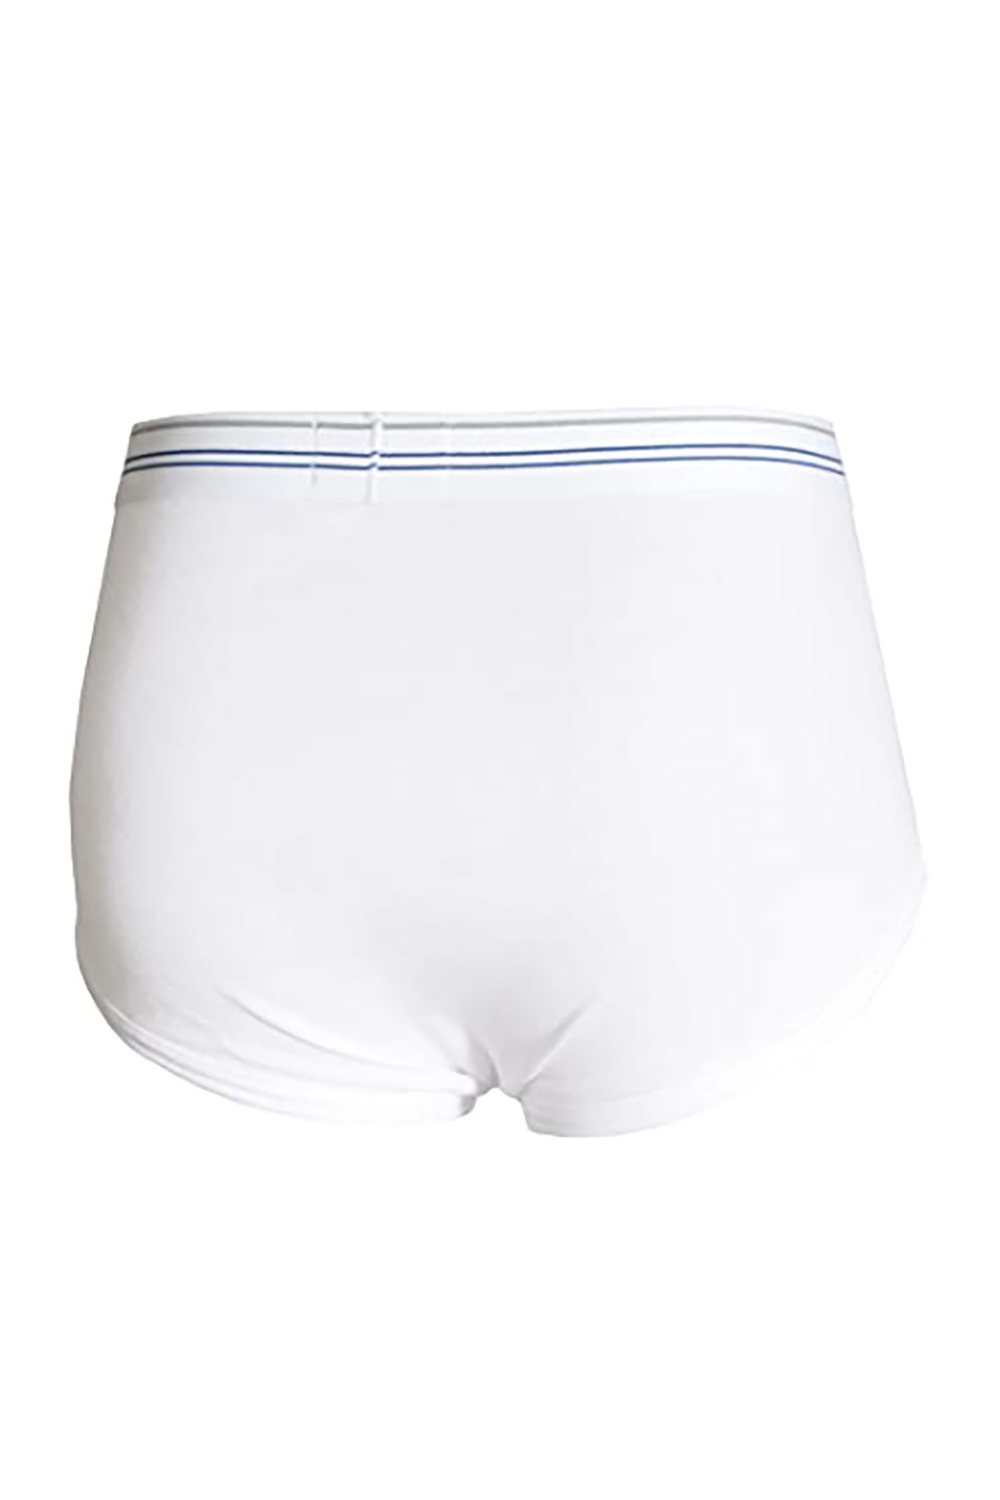 3 Pack 100% Cotton Low Rise Briefs For Men, Comfortable White Underwear With  Enhanced Pouch Support T220816 From Qiuti11, $37.61